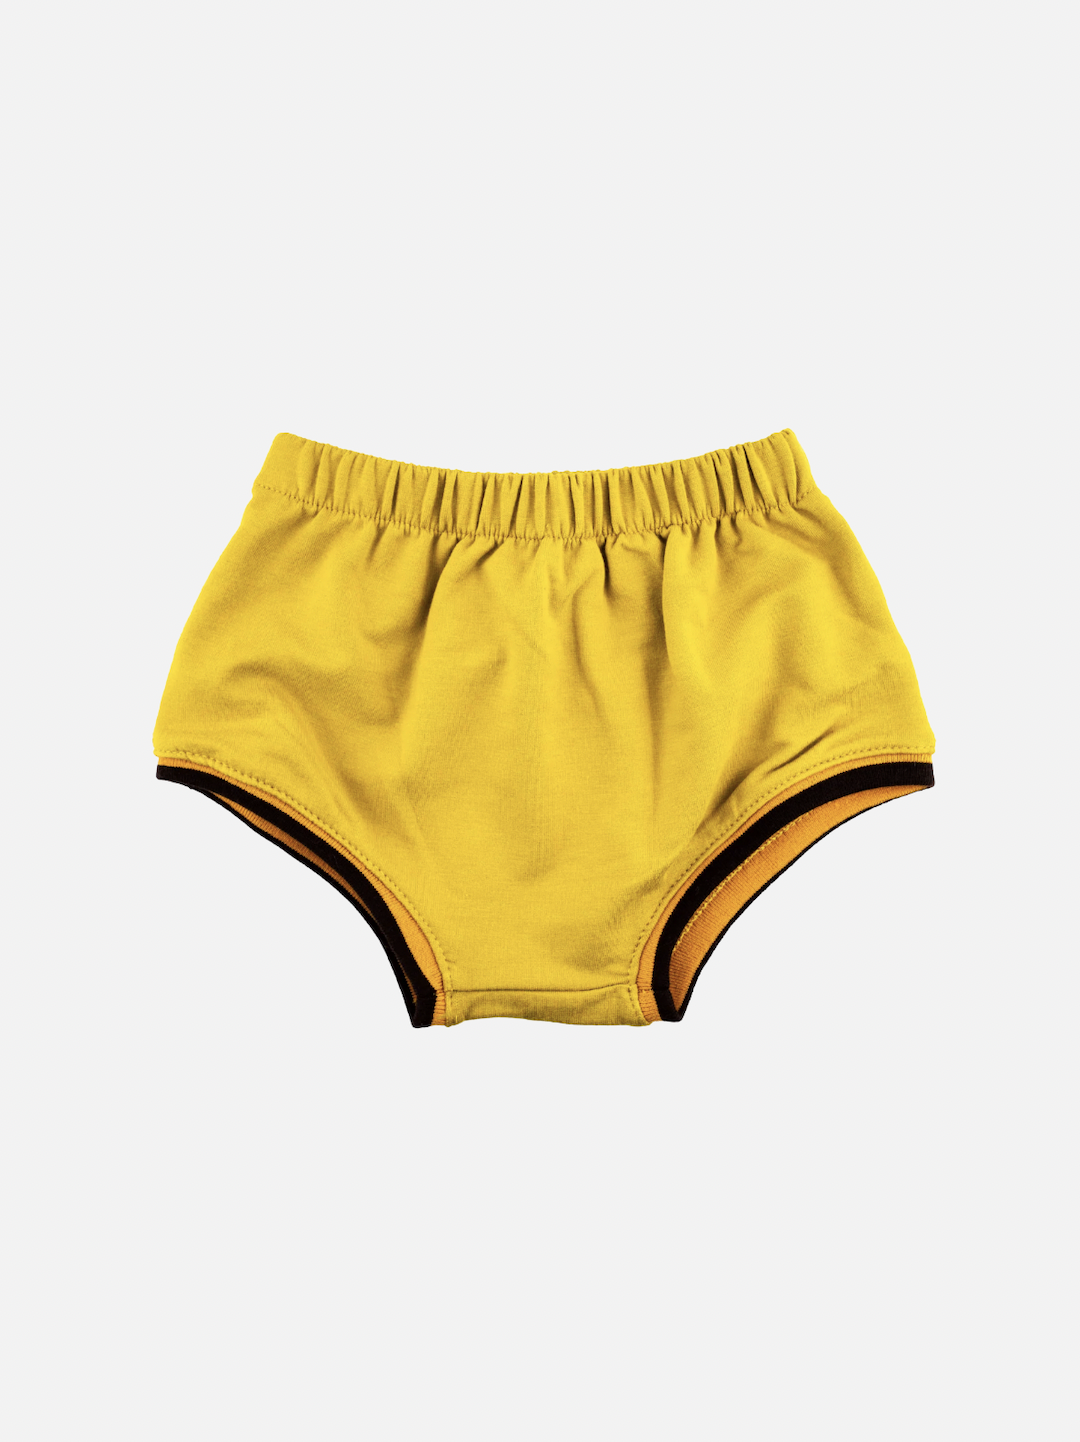 Sunshine | Sunshine yellow kids' bloomers with black trim on leg holes, front view